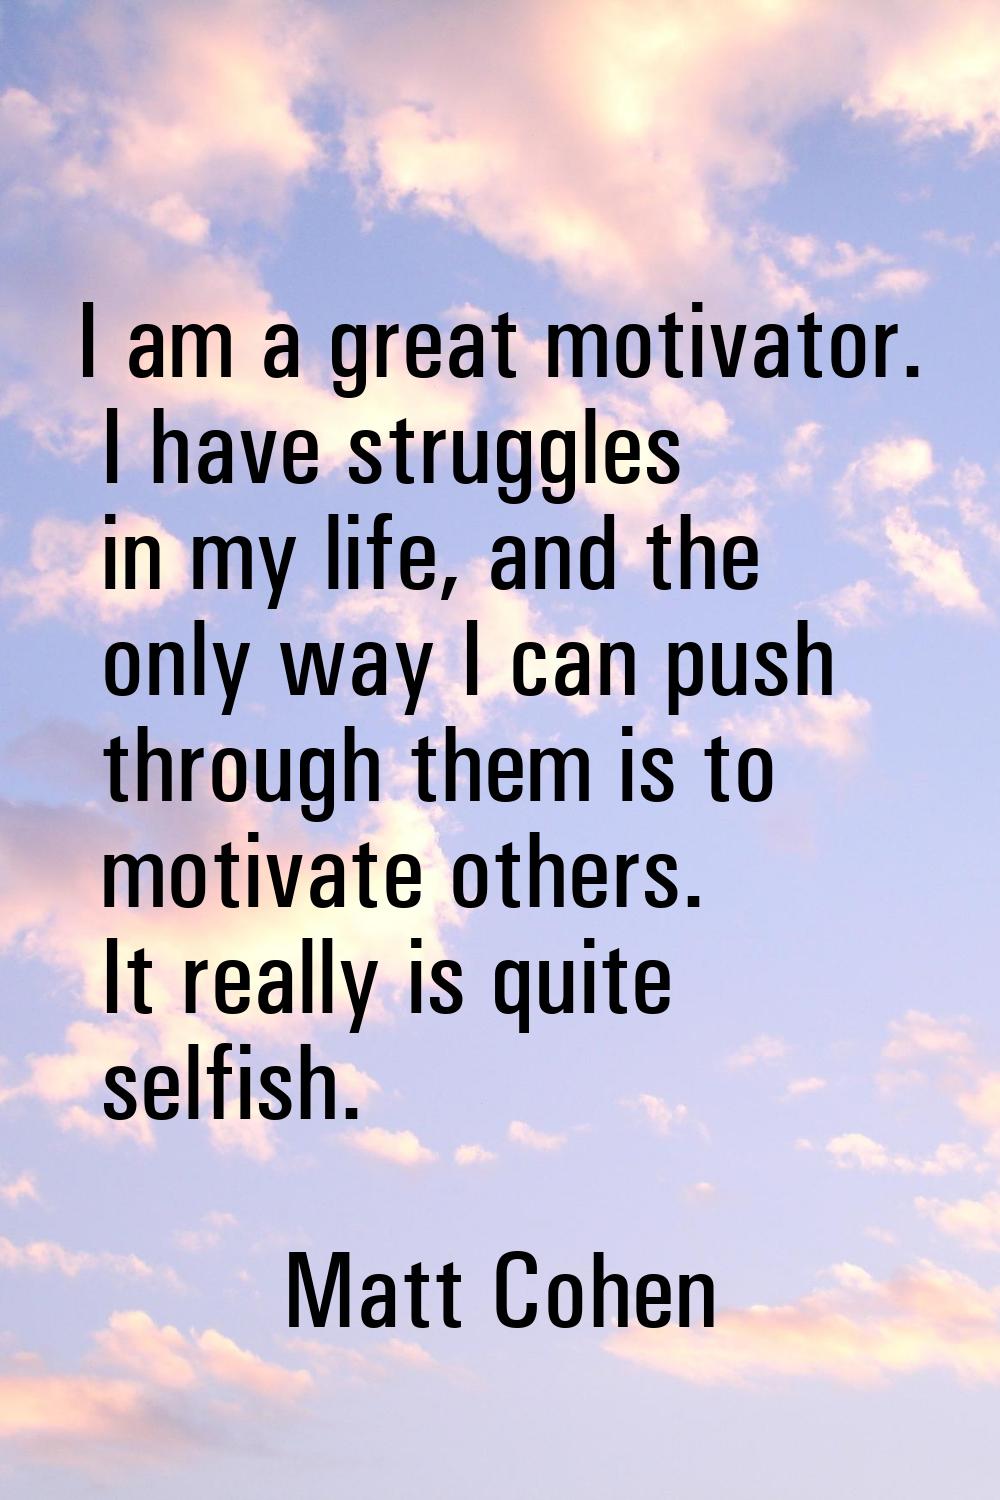 I am a great motivator. I have struggles in my life, and the only way I can push through them is to